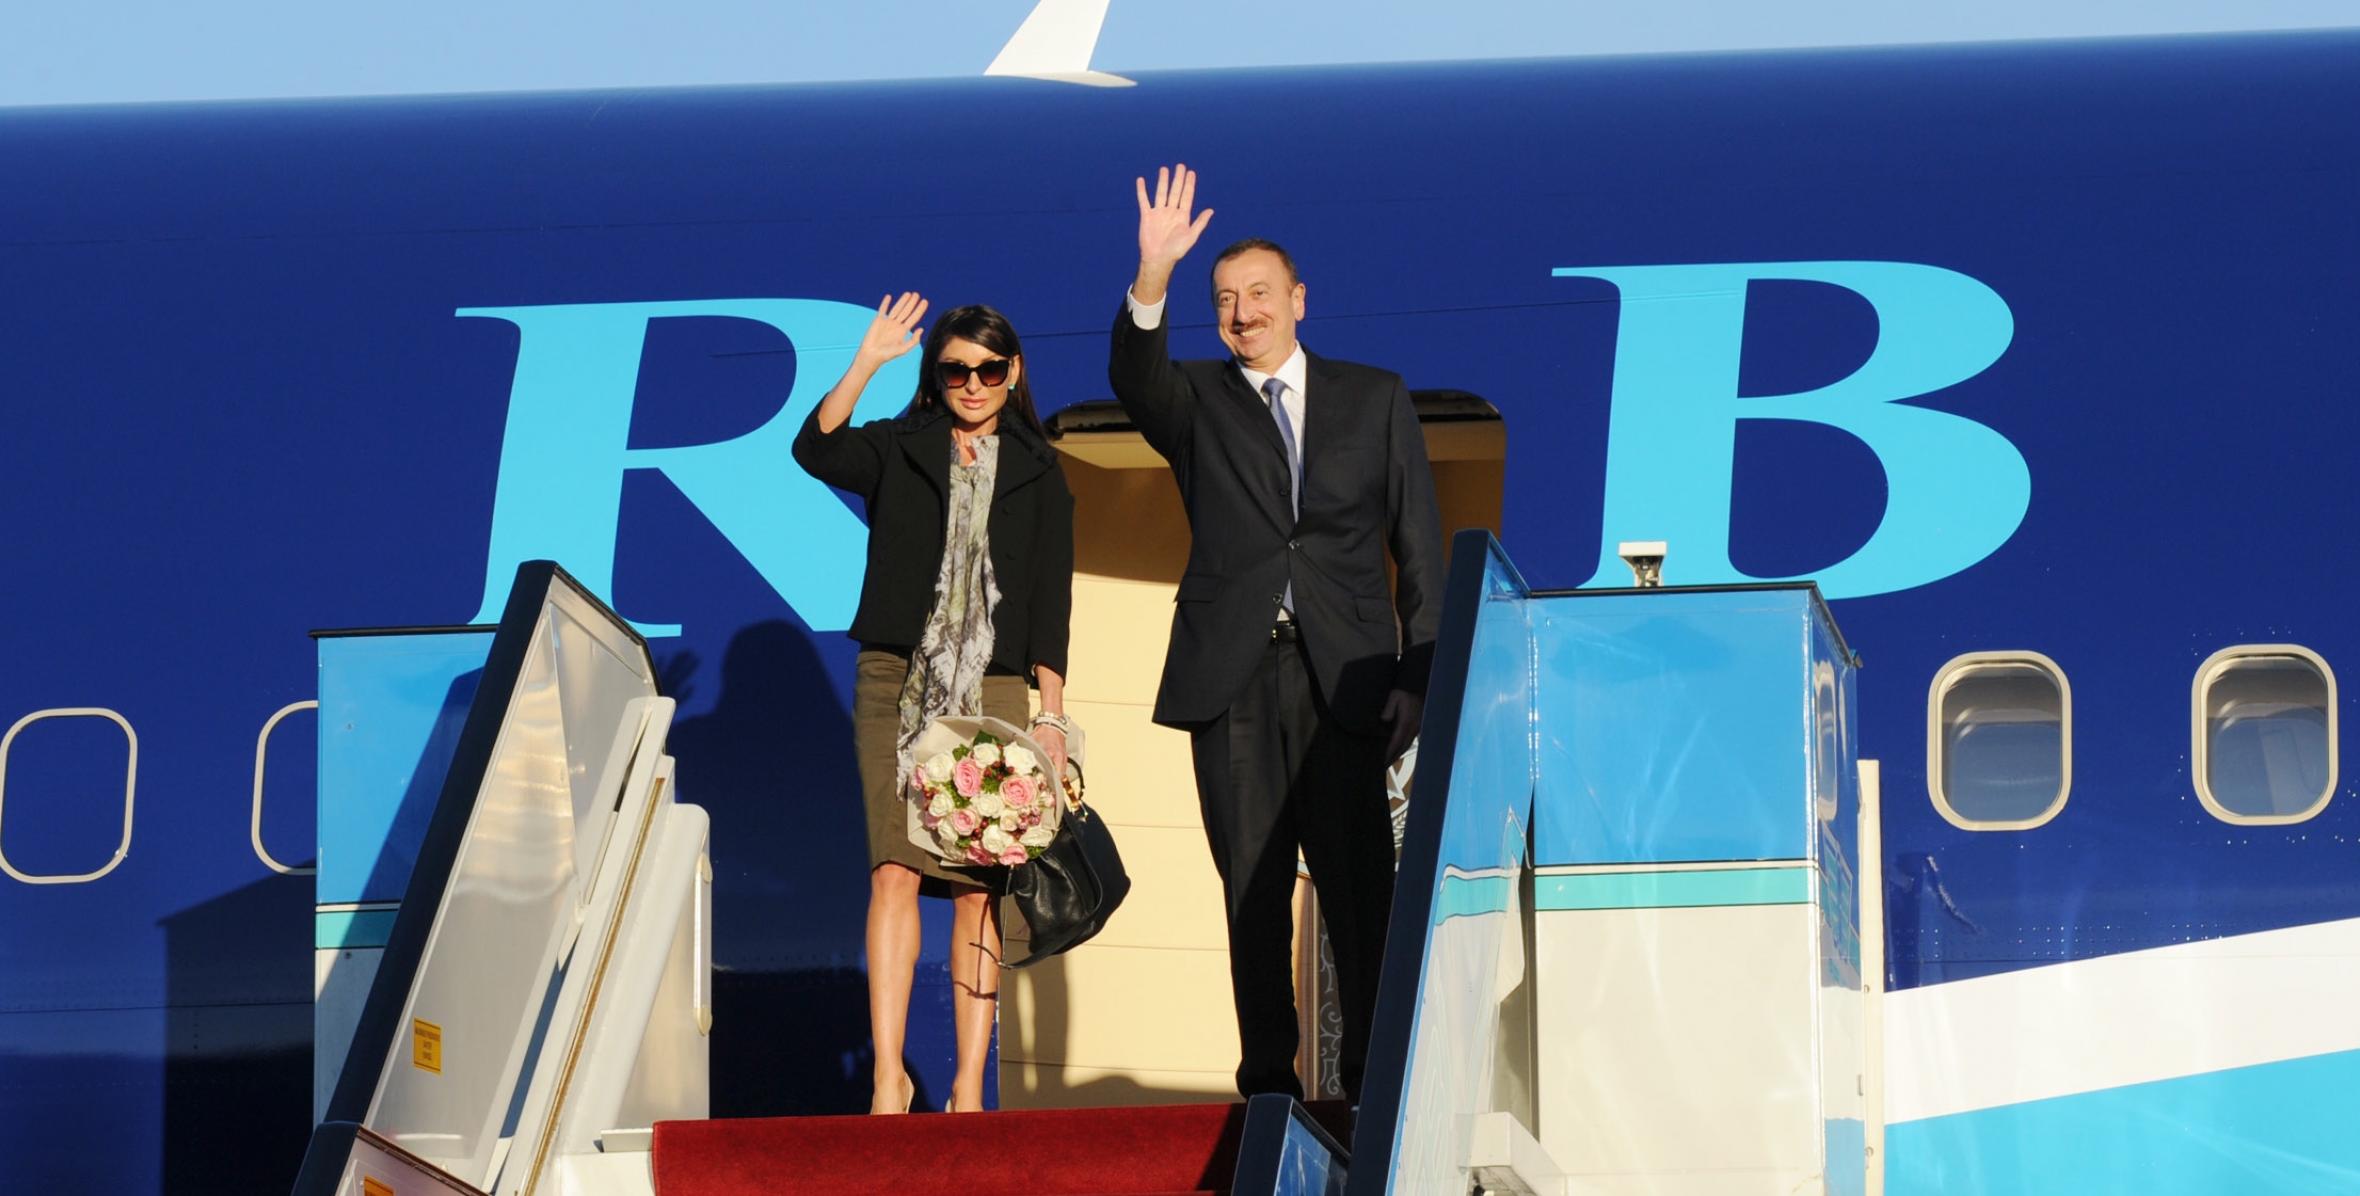 Ilham Aliyev’s official visit to the Republic of Turkey has ended